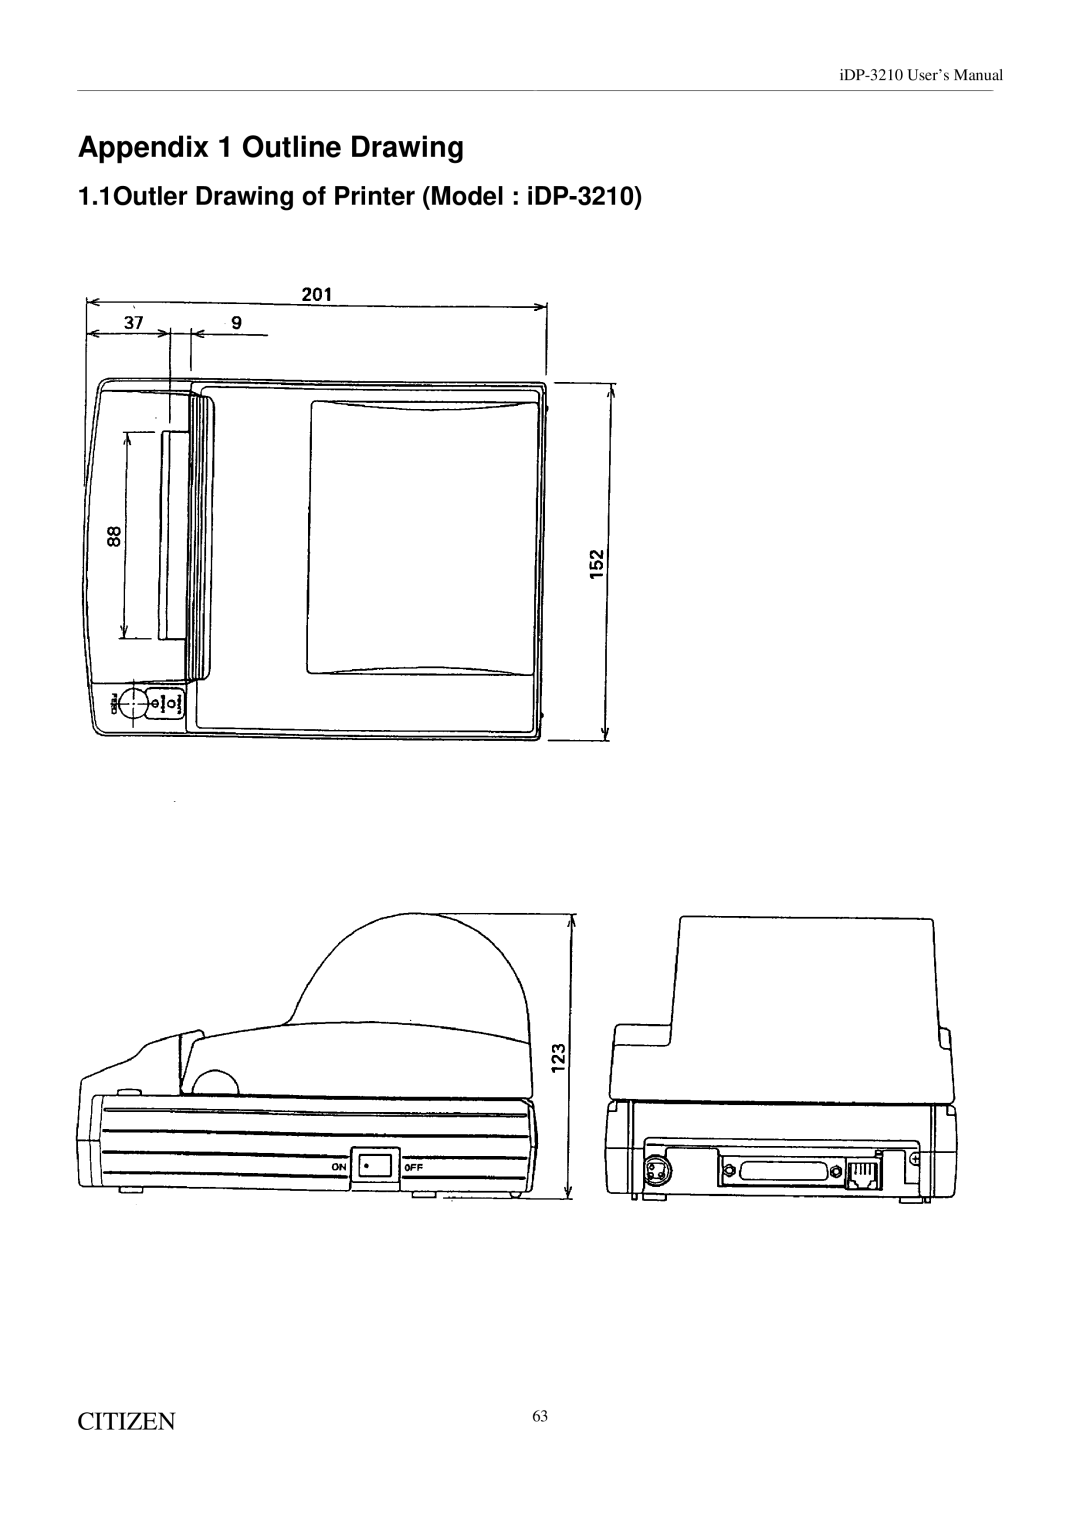 Citizen Systems user manual Appendix 1 Outline Drawing, 1Outler Drawing of Printer Model iDP-3210 